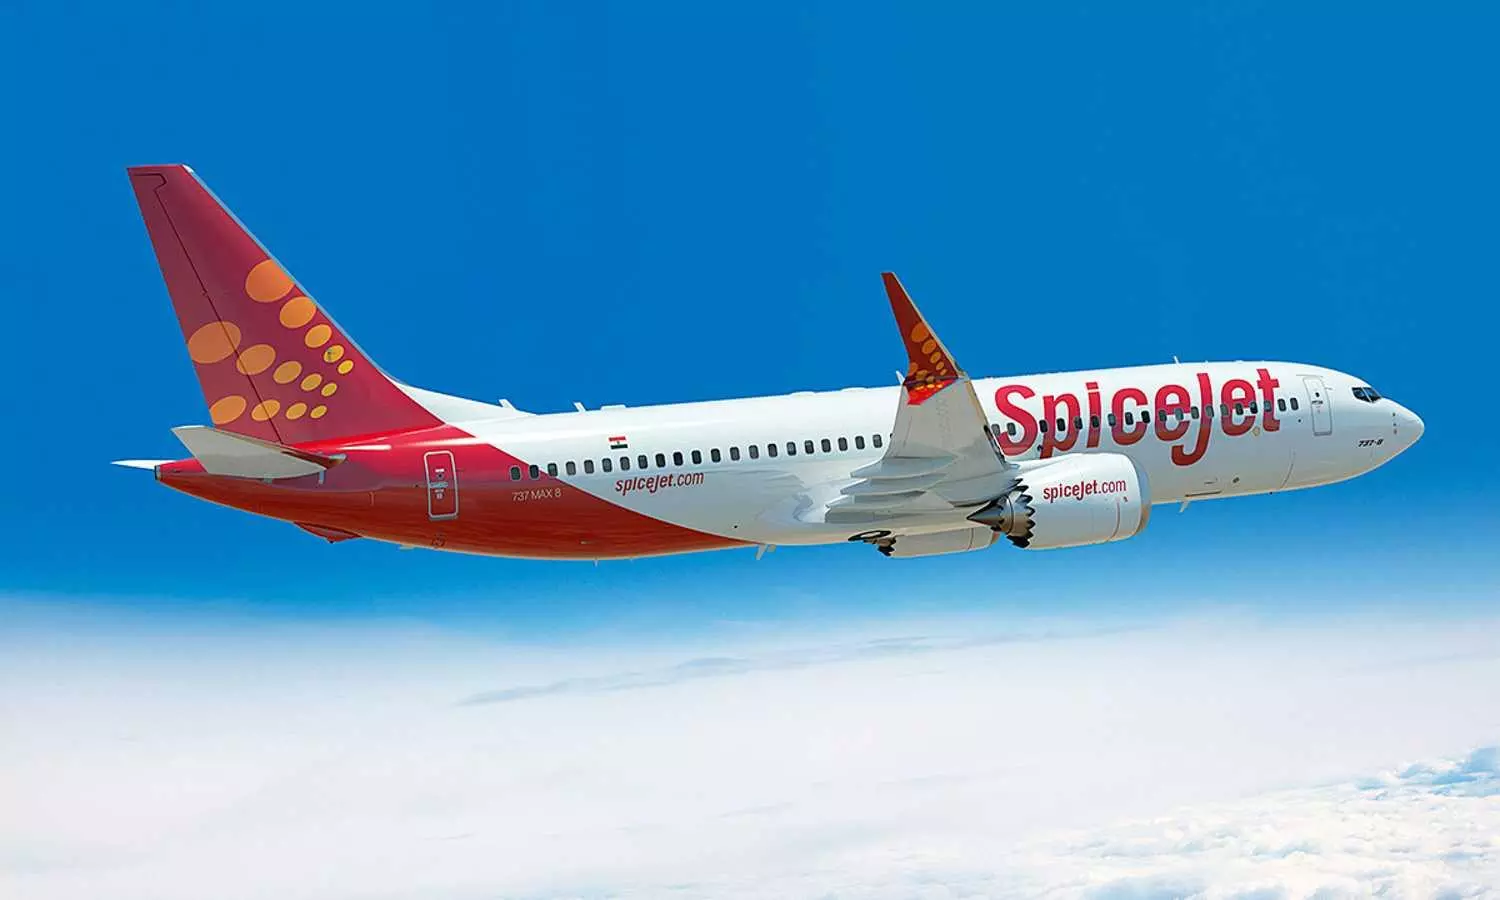 SpiceJet hives off cargo and logistics business into separate entity